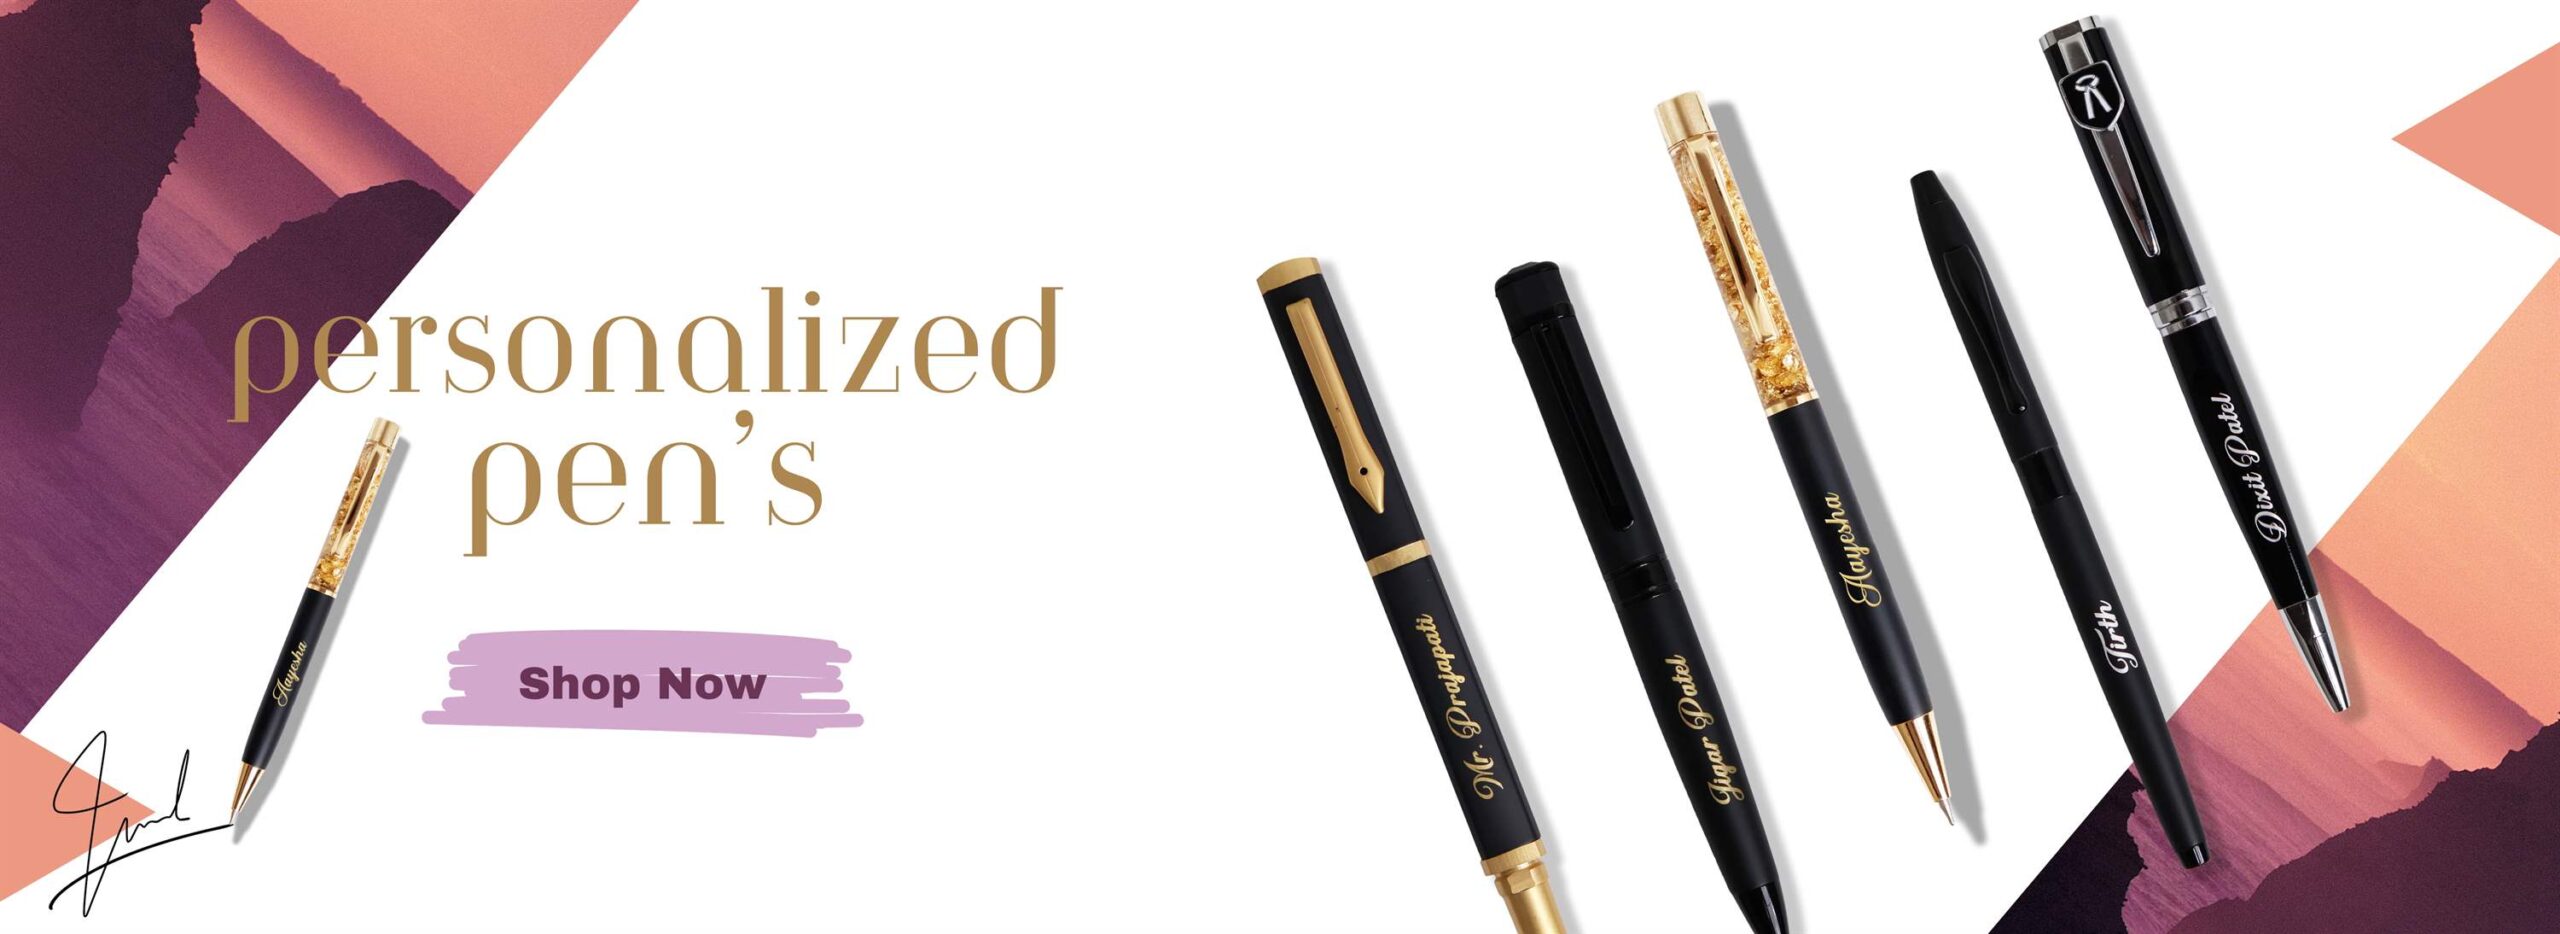 personalized pen's